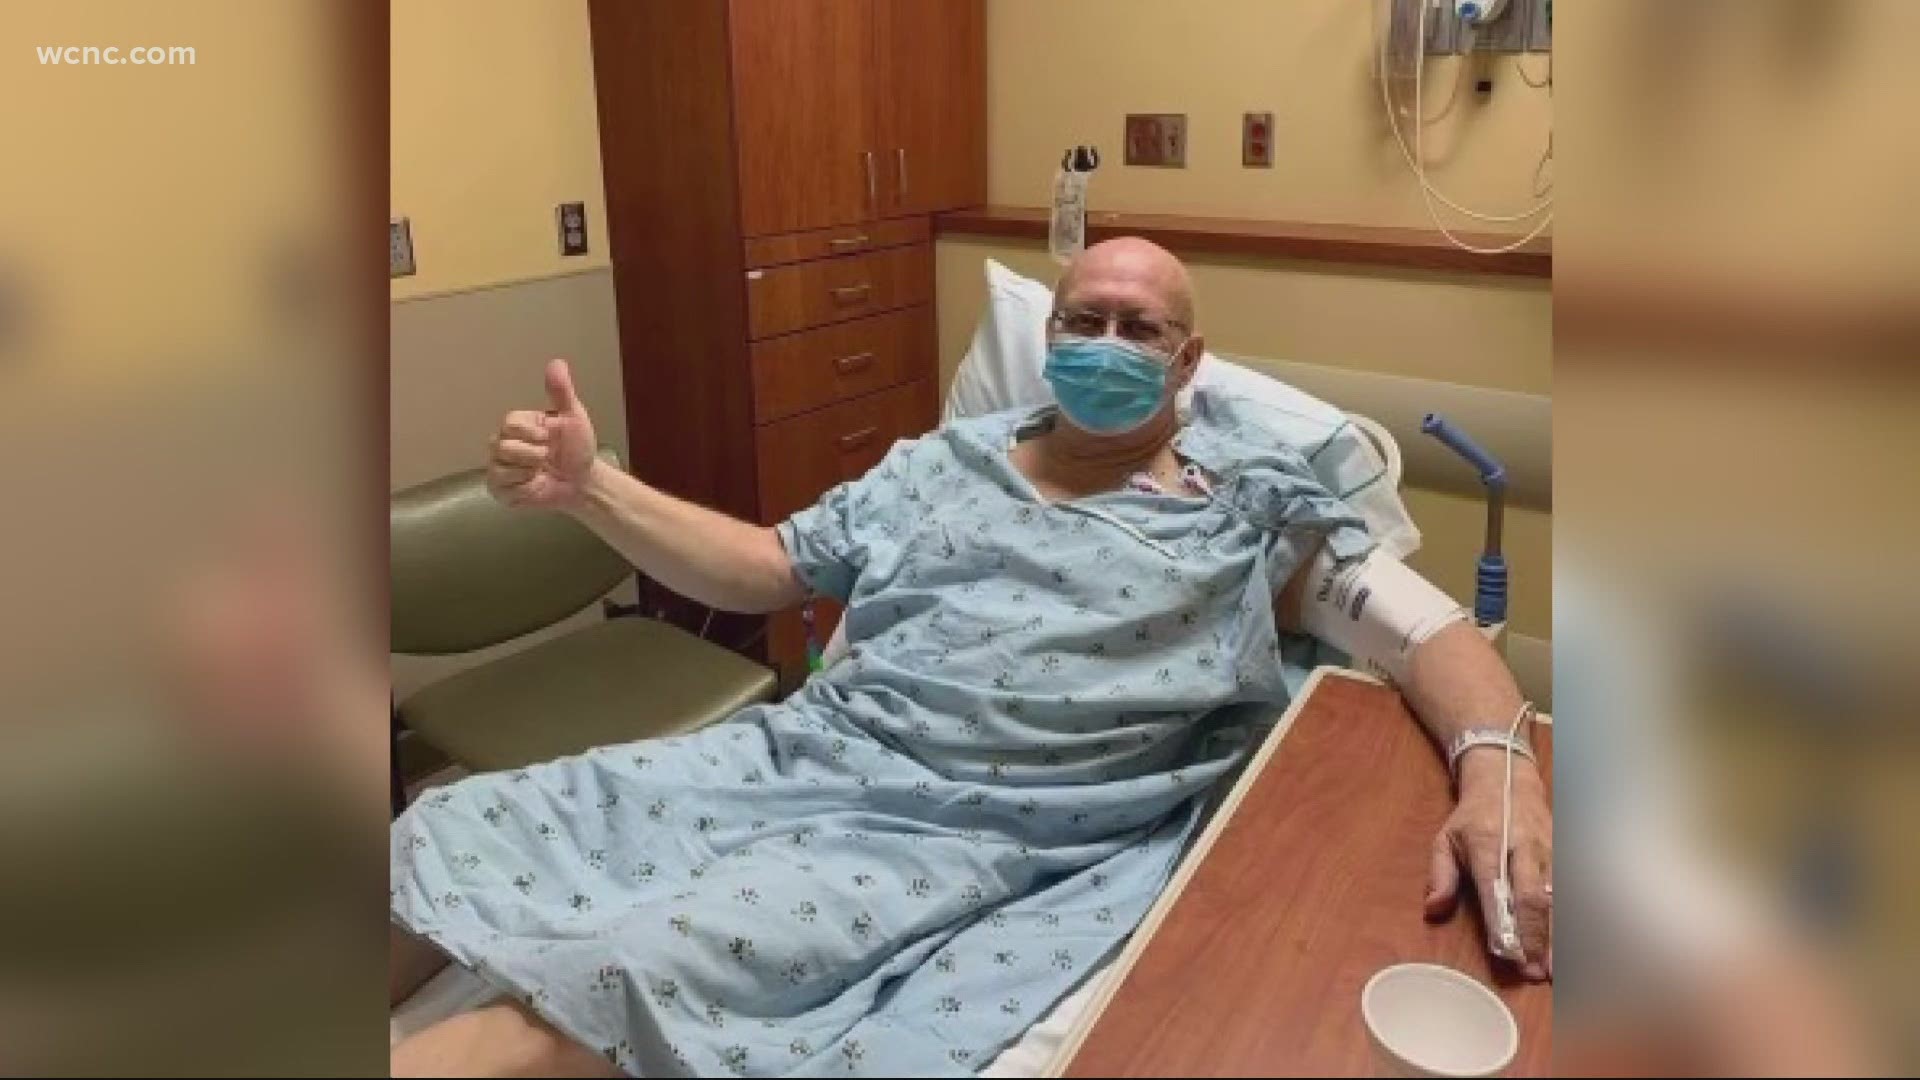 He's typically the one caring for others, but this Thanksgiving he's in the hospital getting a stem cell transplant in his fight against a rare form of leukemia.